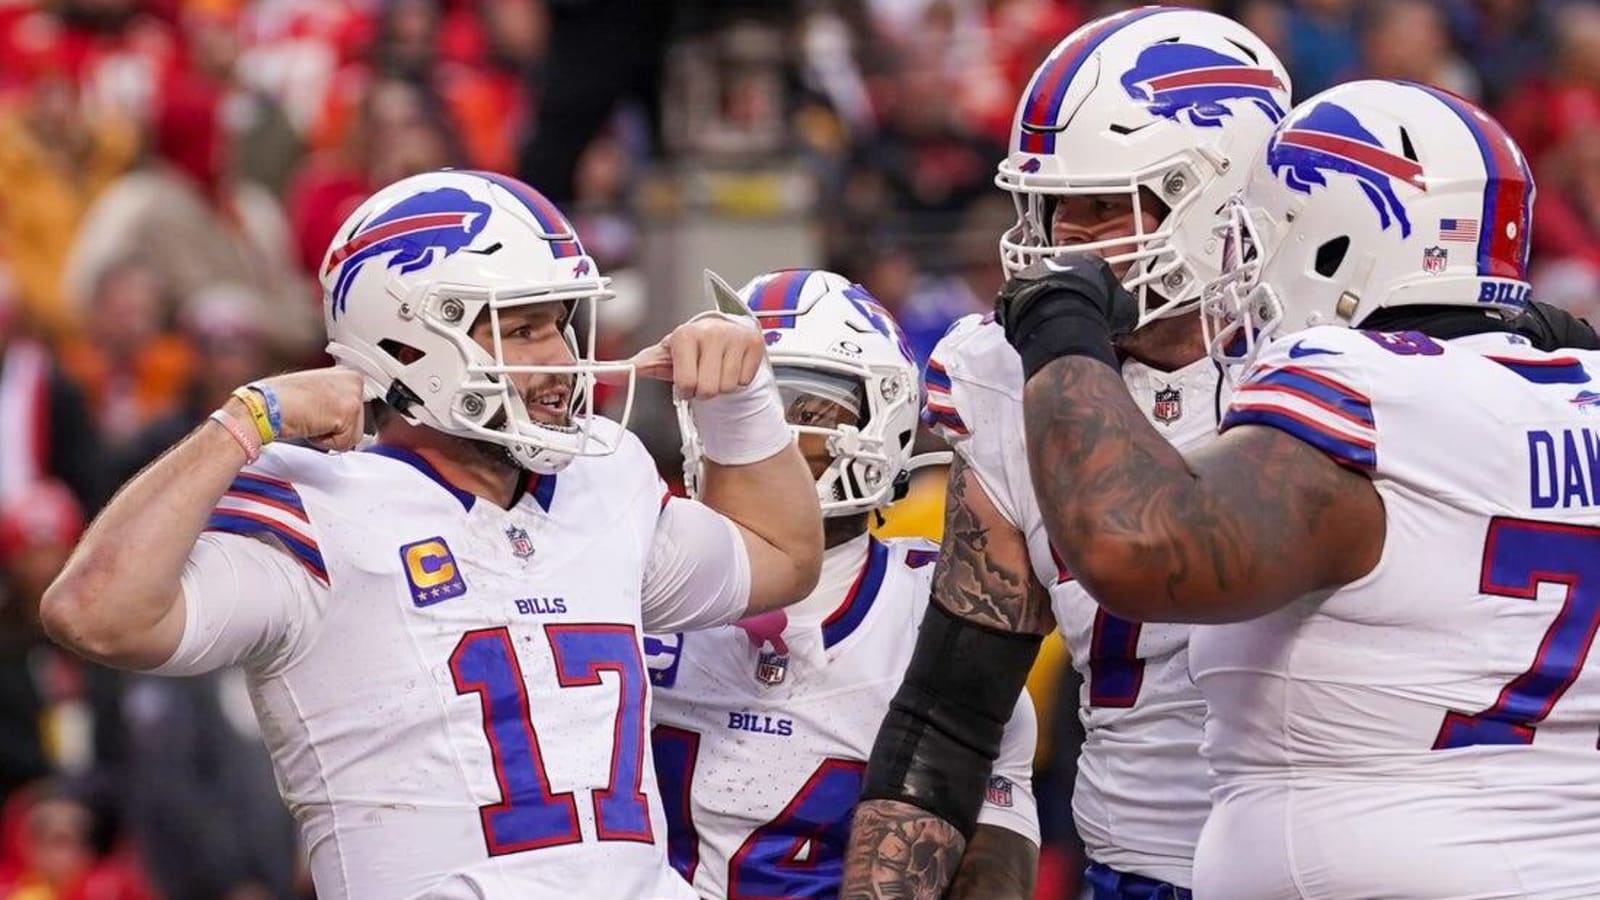 Bills pull out dramatic road win over slumping Chiefs